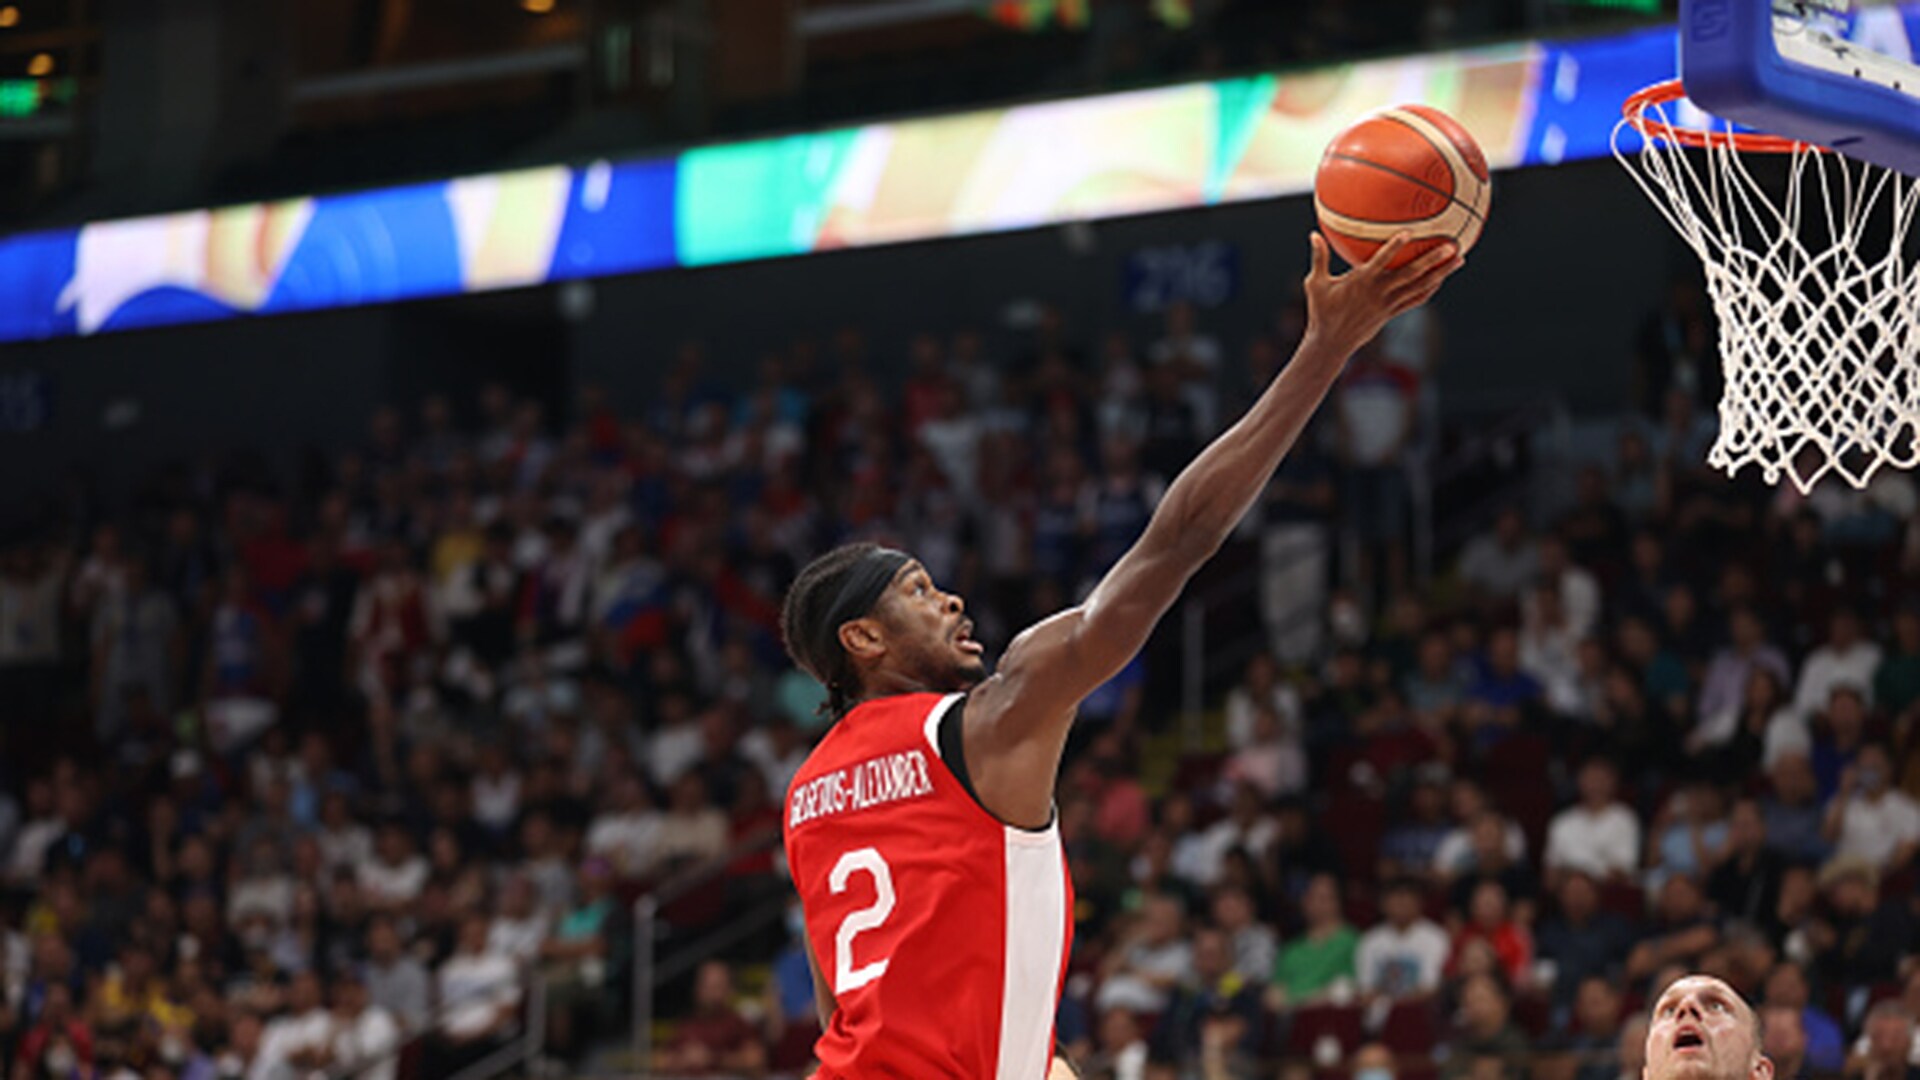 Canada holds off US to win bronze at Basketball World Cup in OT, 127-118